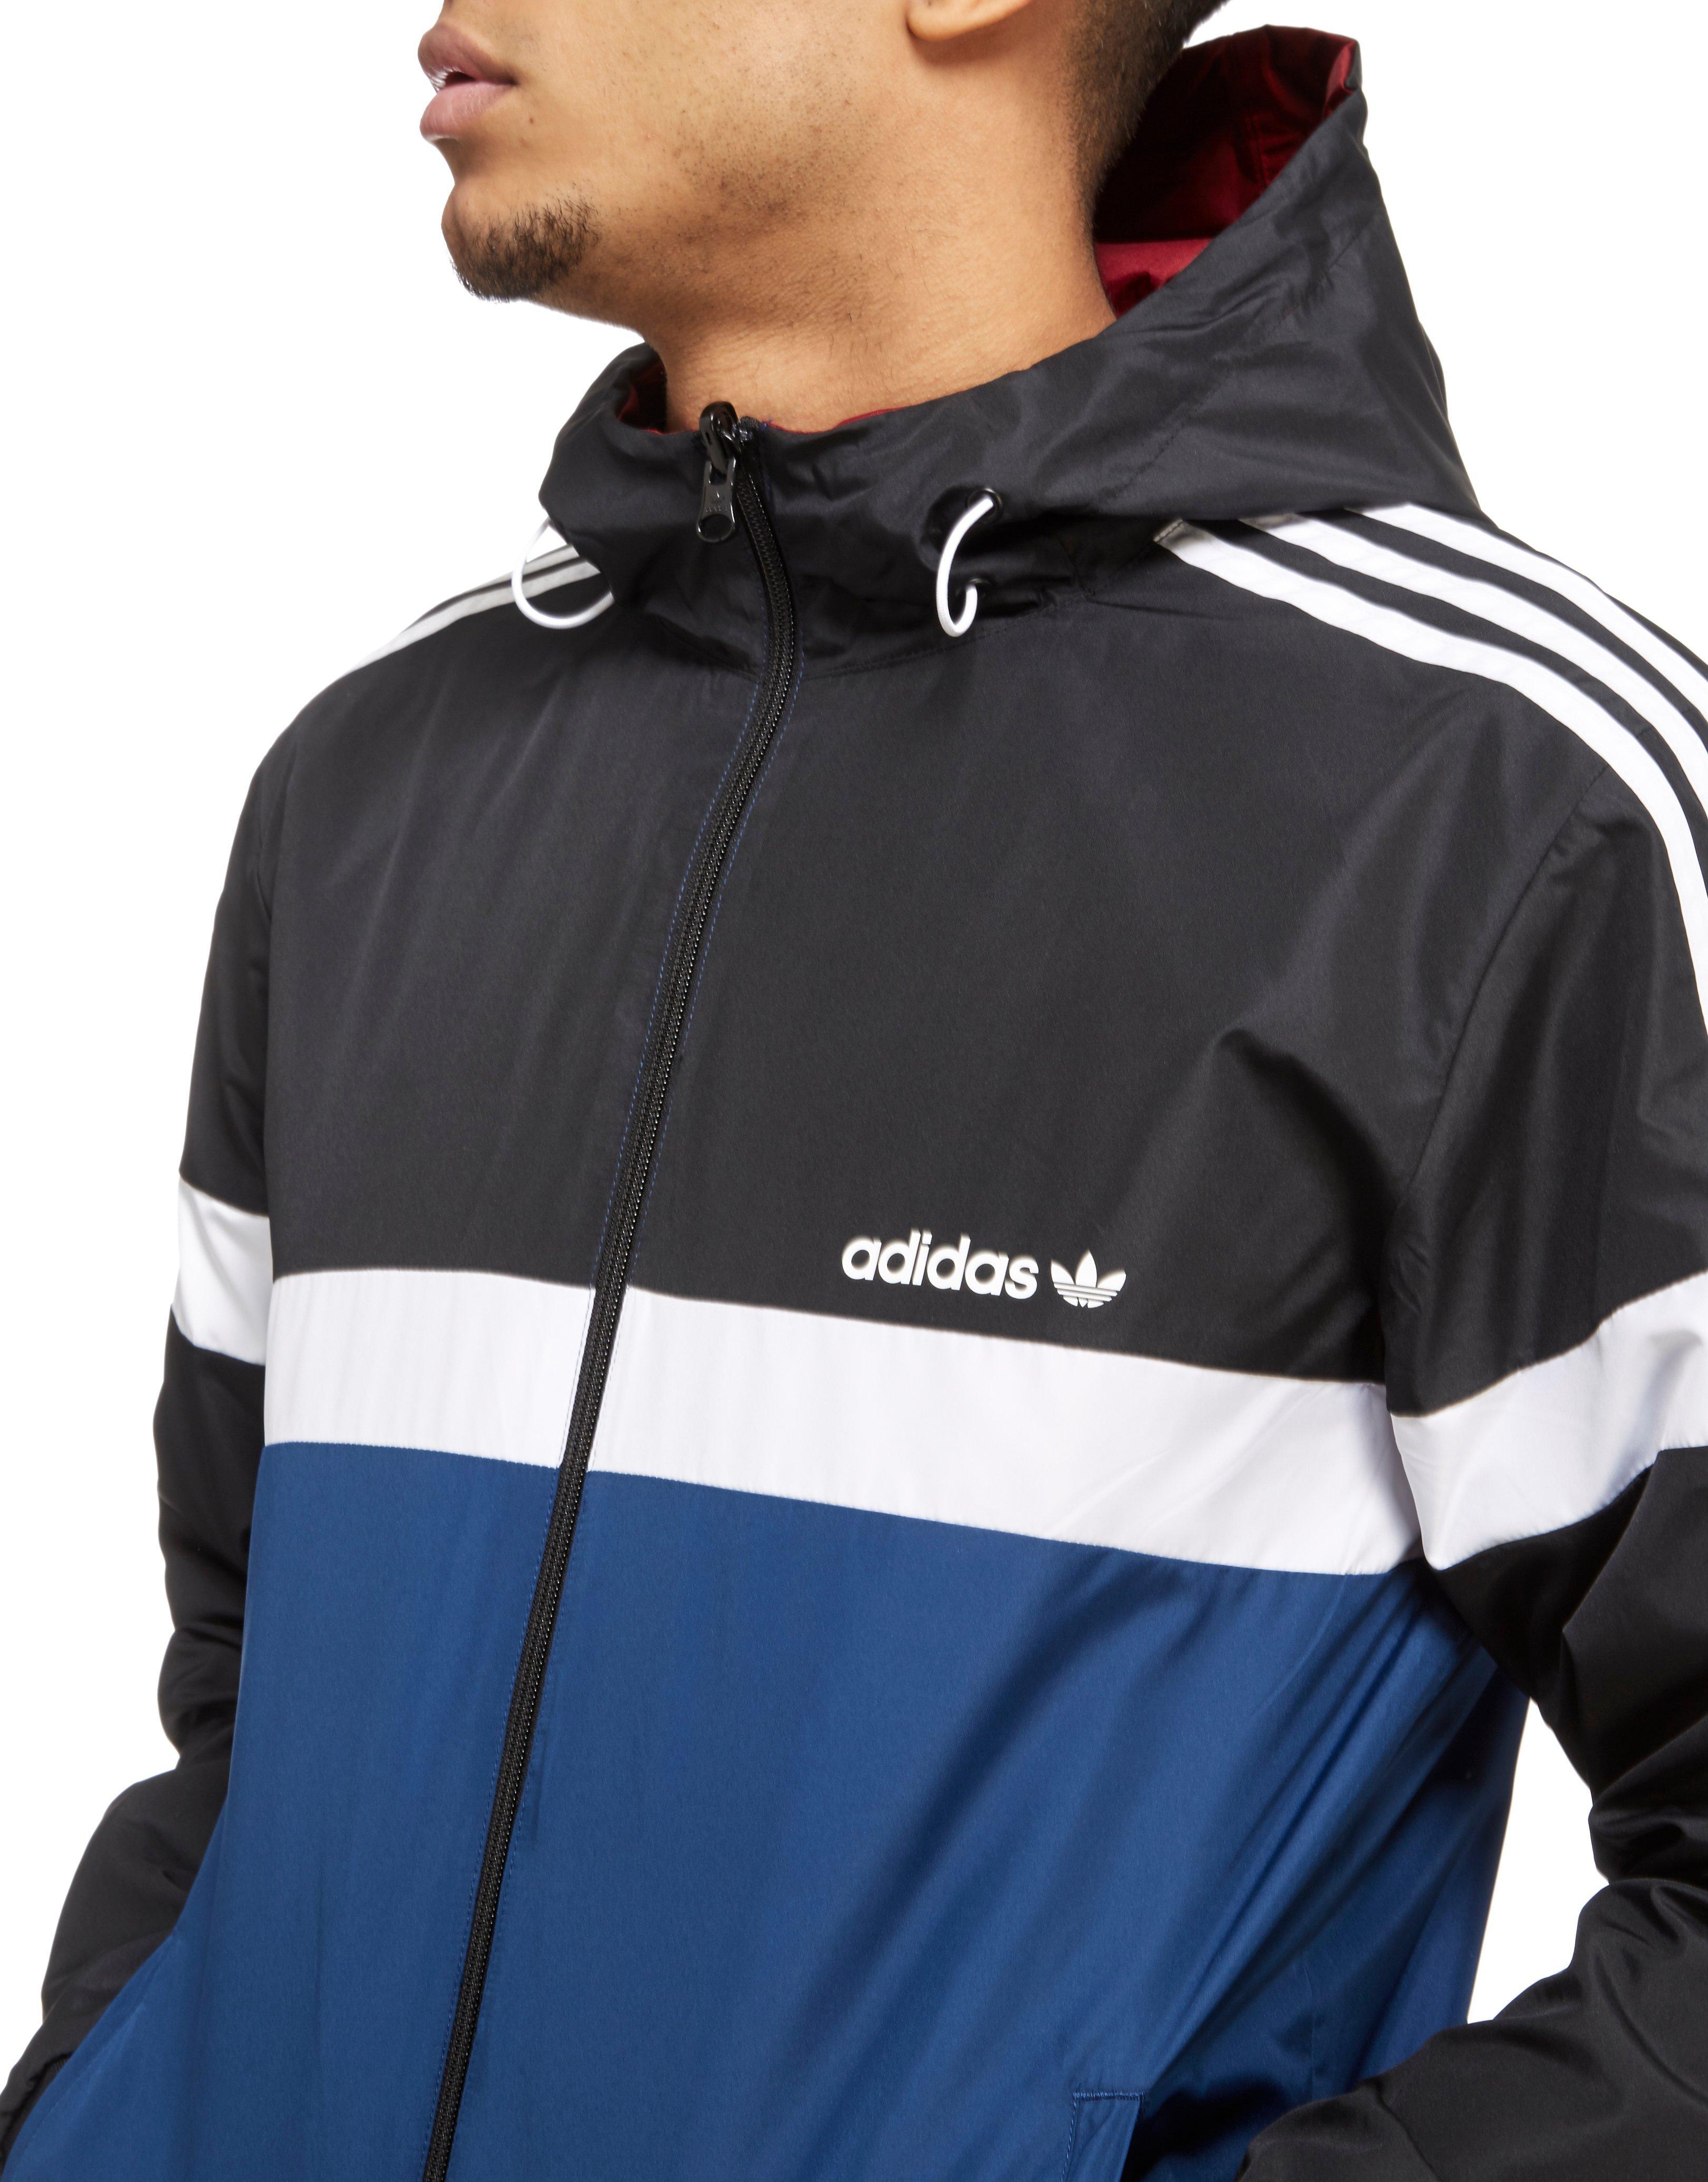 adidas Originals Synthetic Itasca Reversible Jacket in Blue for Men - Lyst